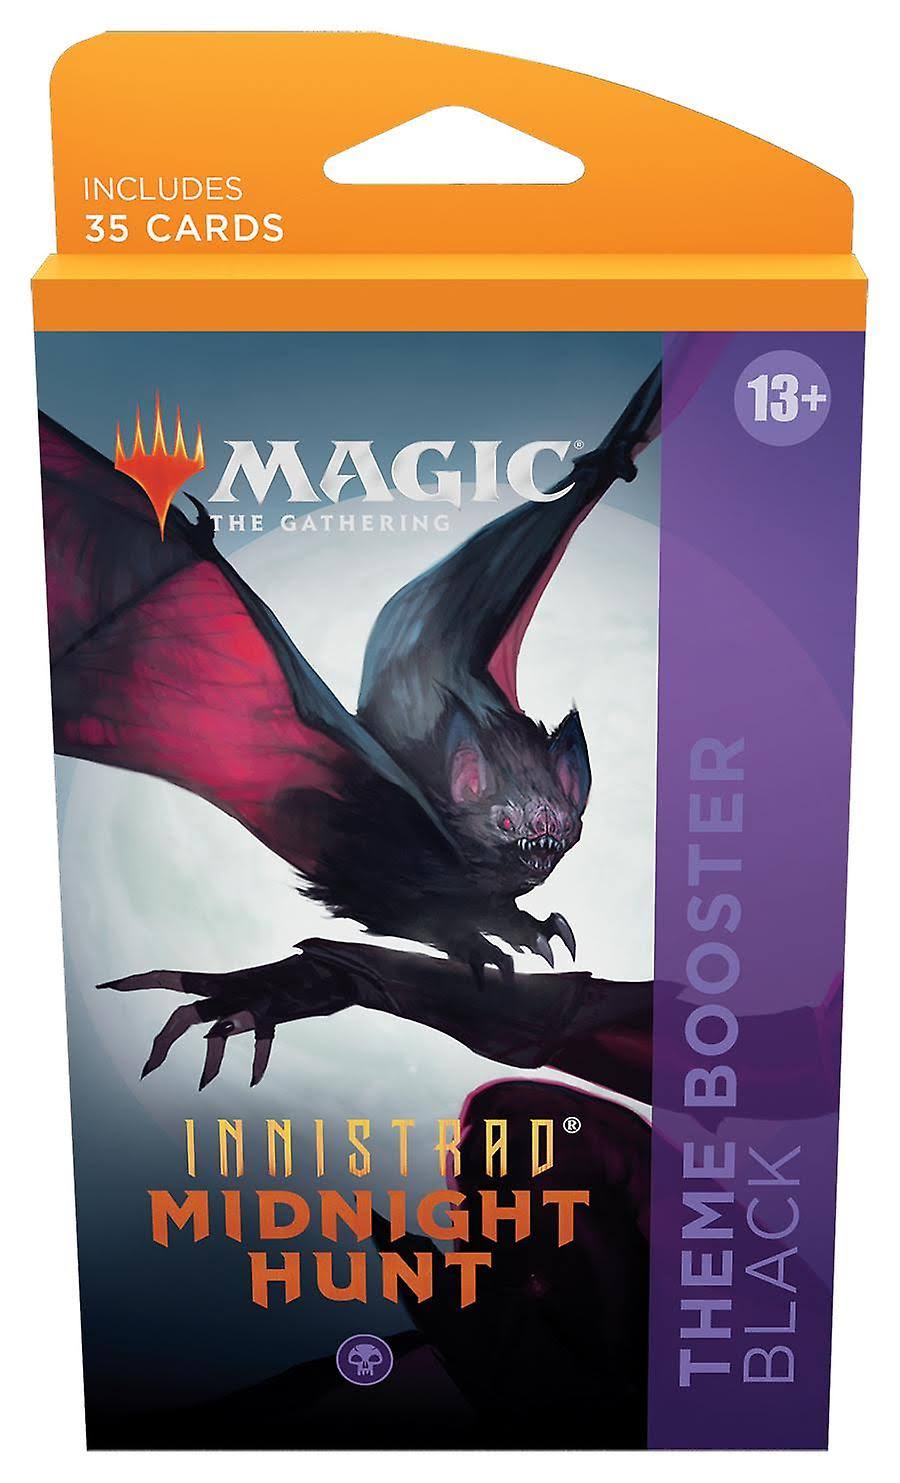 Magic The Gathering: Innistrad: Midnight Hunt: Theme Booster